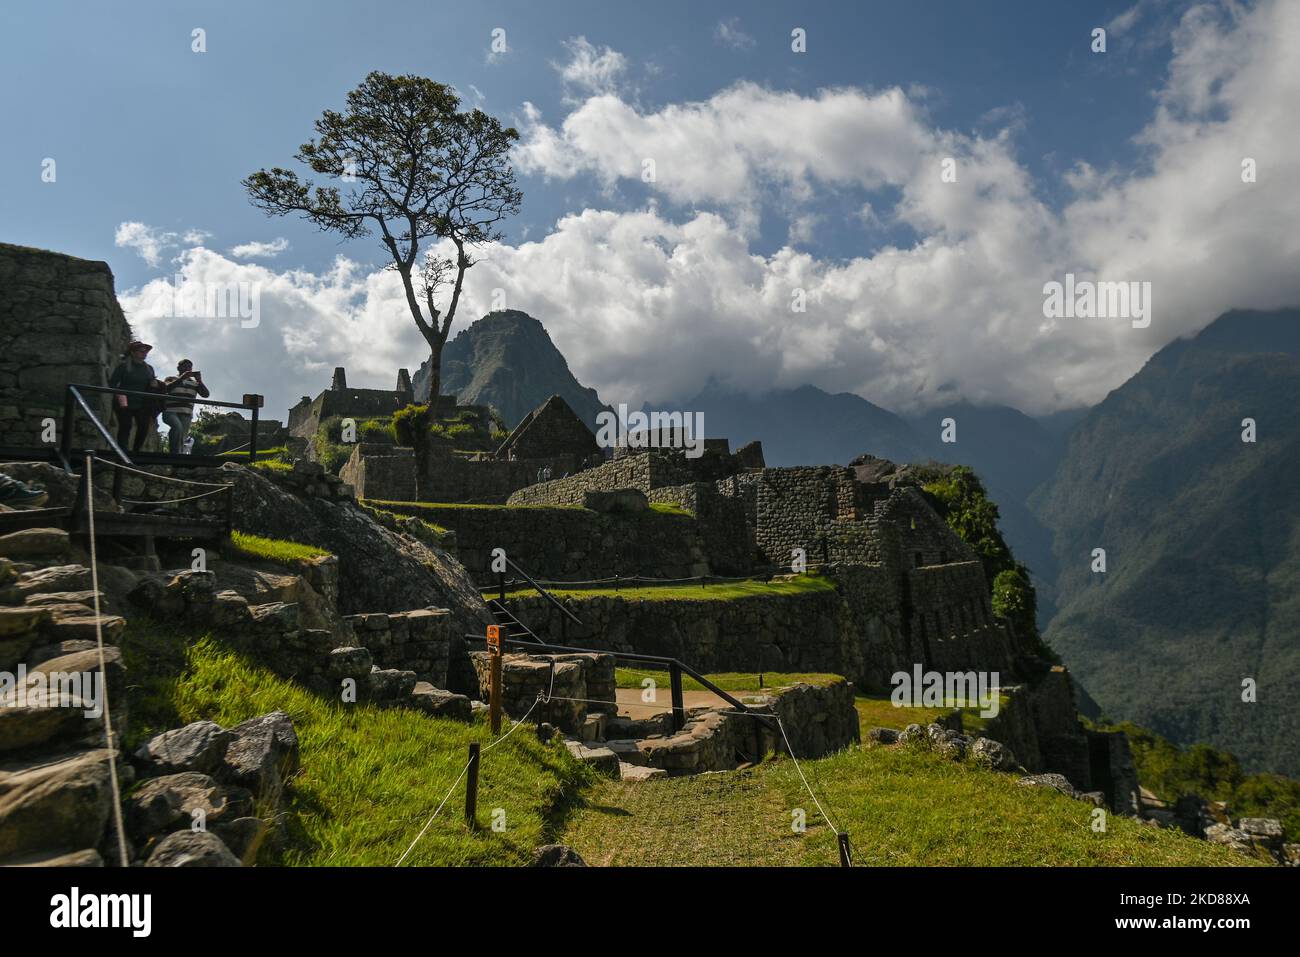 View of the ancient Inca city of Machu Picchu located in the Andes at an altitude of 2,430 meters (7,970 feet). The most famous icon of the Inca civilization was declared a Peruvian Historical Sanctuary in 1981, a UNESCO World Heritage Site in 1983, and in 2007 was then declared one of the Seven New Wonders of the World. On Wednesday, 20 April 2022, in Historic Sanctuary of Machu Picchu, Urubamba Province, Peru. (Photo by Artur Widak/NurPhoto) Stock Photo